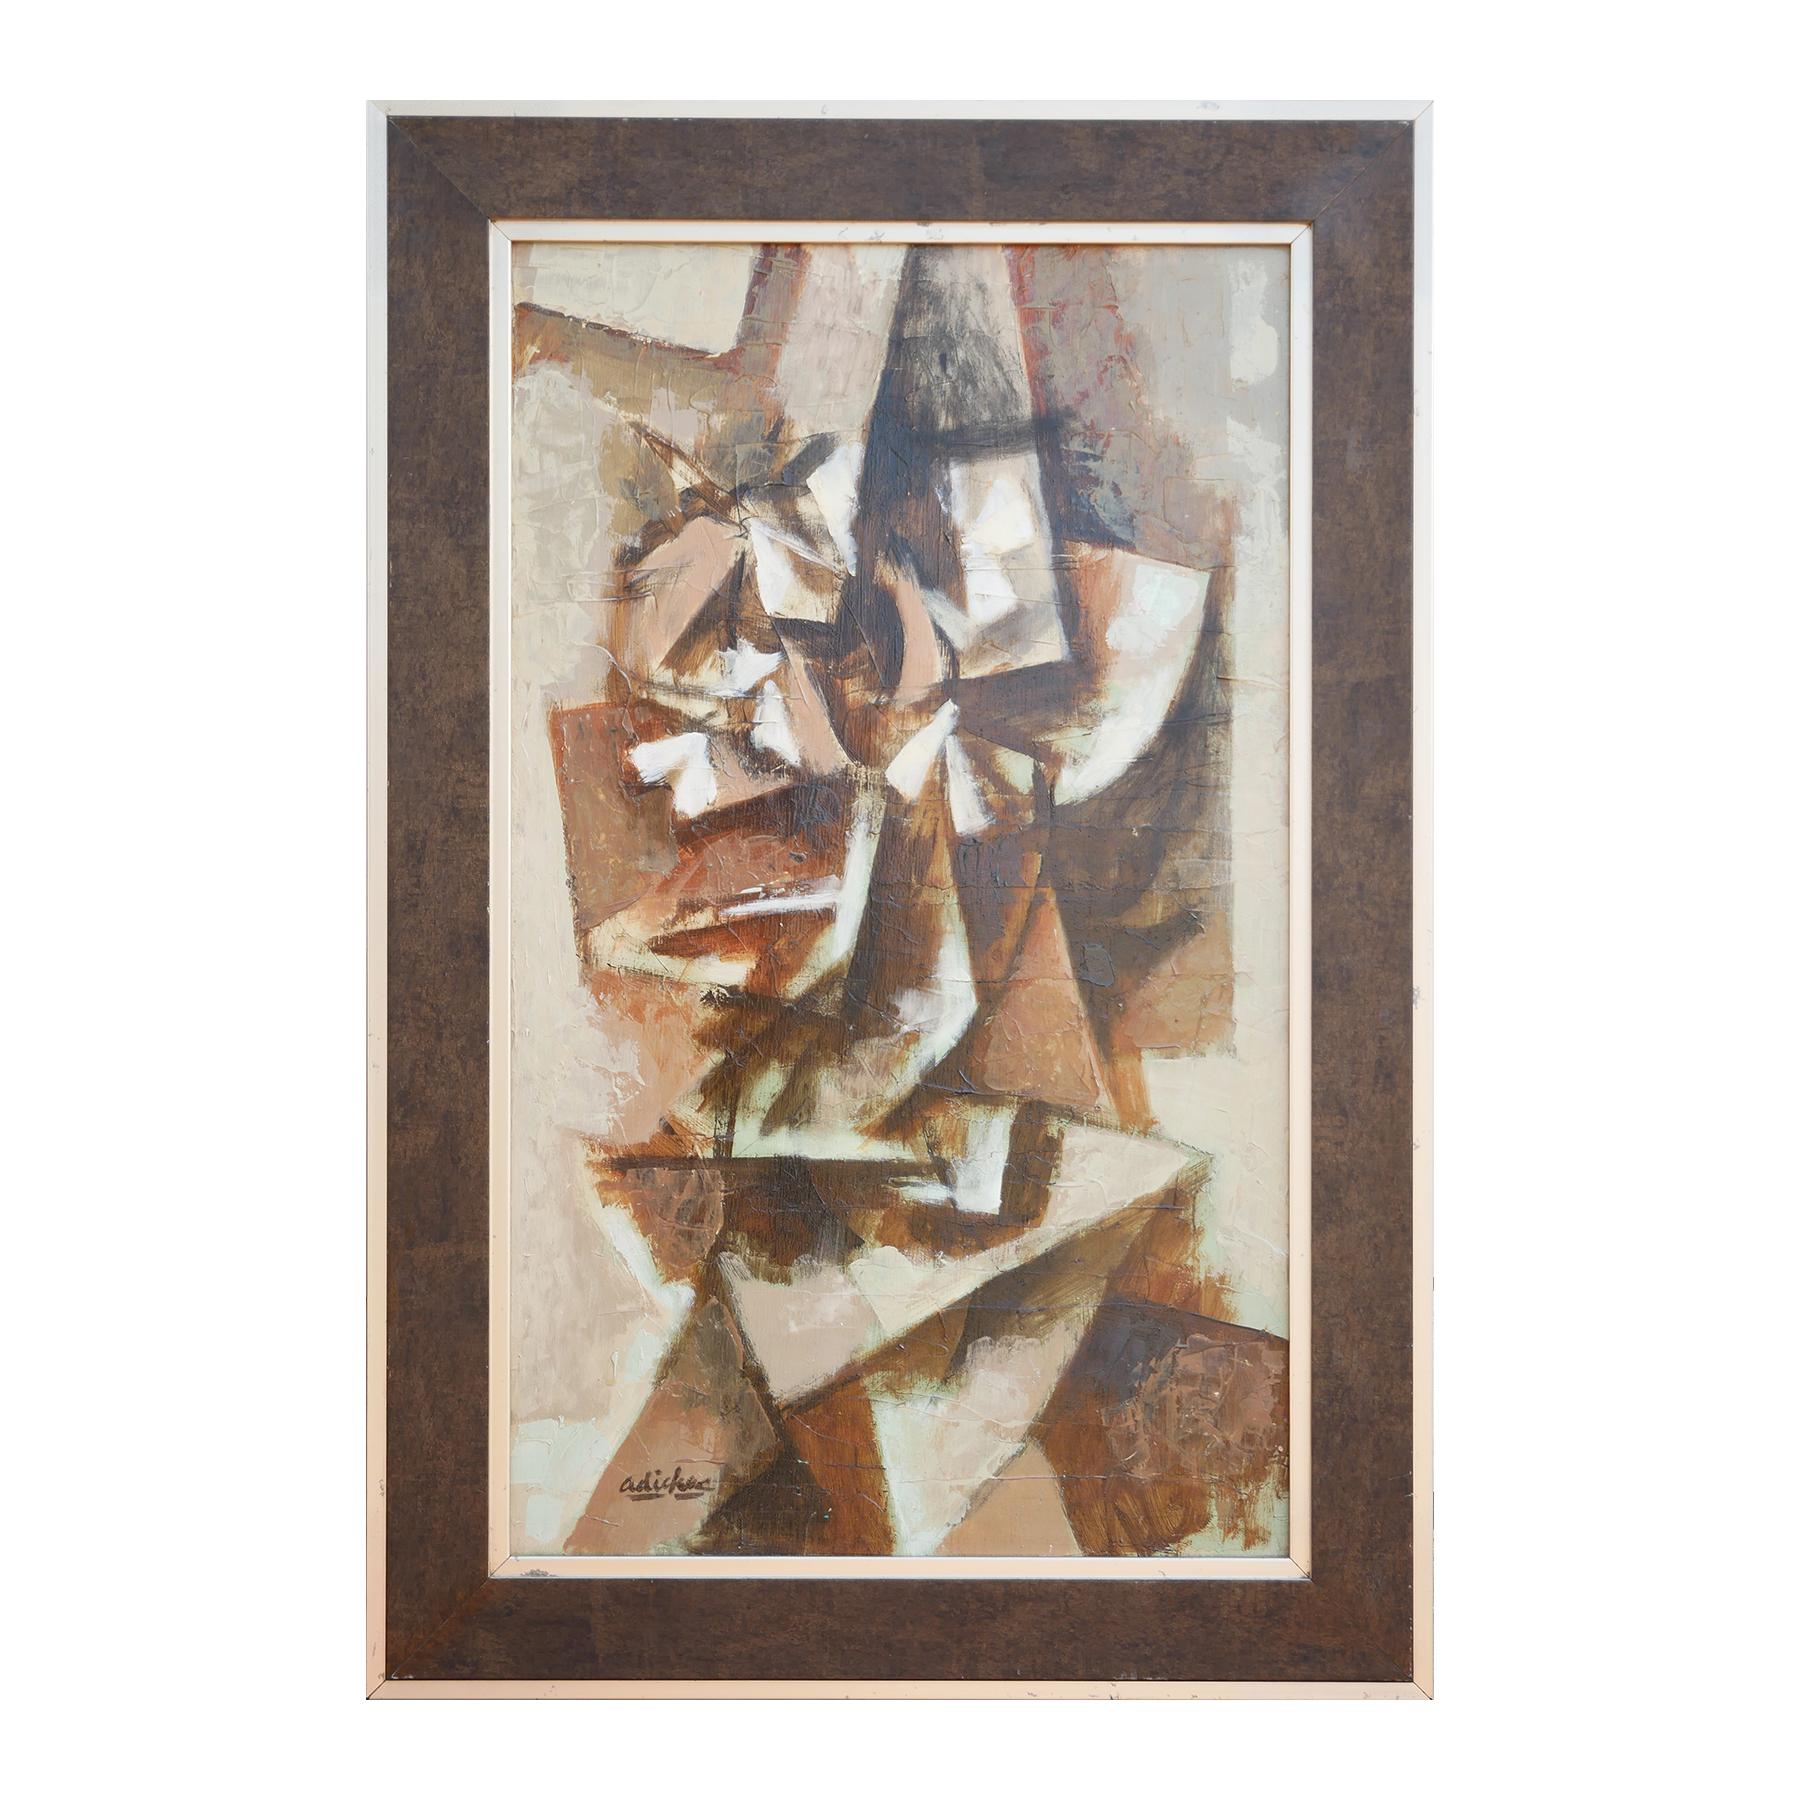 Modern abstract brown toned Cubist inspired still life painting by Houston, TX artist David Adickes. The work features a central floral arrangement set against a light brown background. Signed by the artist in the front lower left corner. Currently